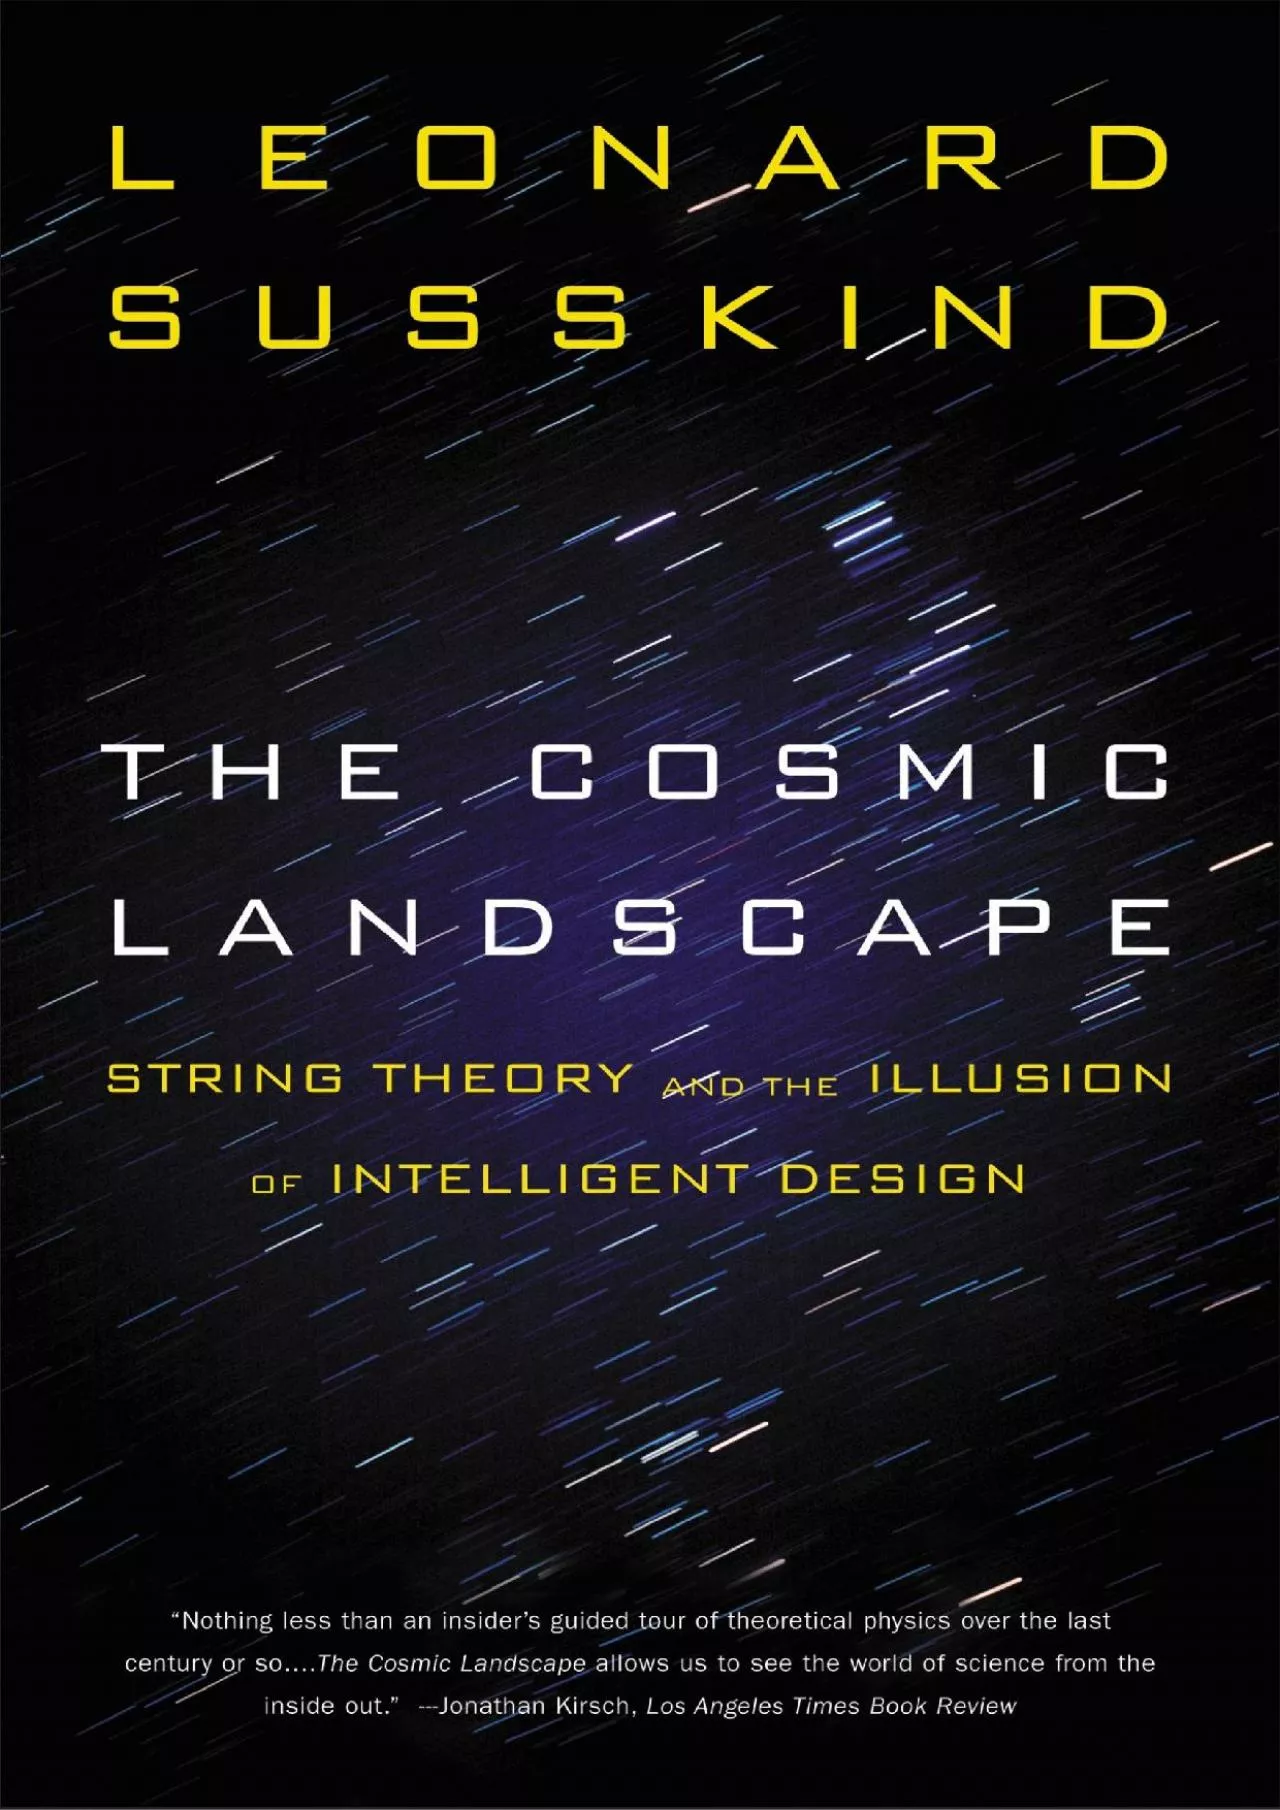 (EBOOK)-The Cosmic Landscape: String Theory and the Illusion of Intelligent Design